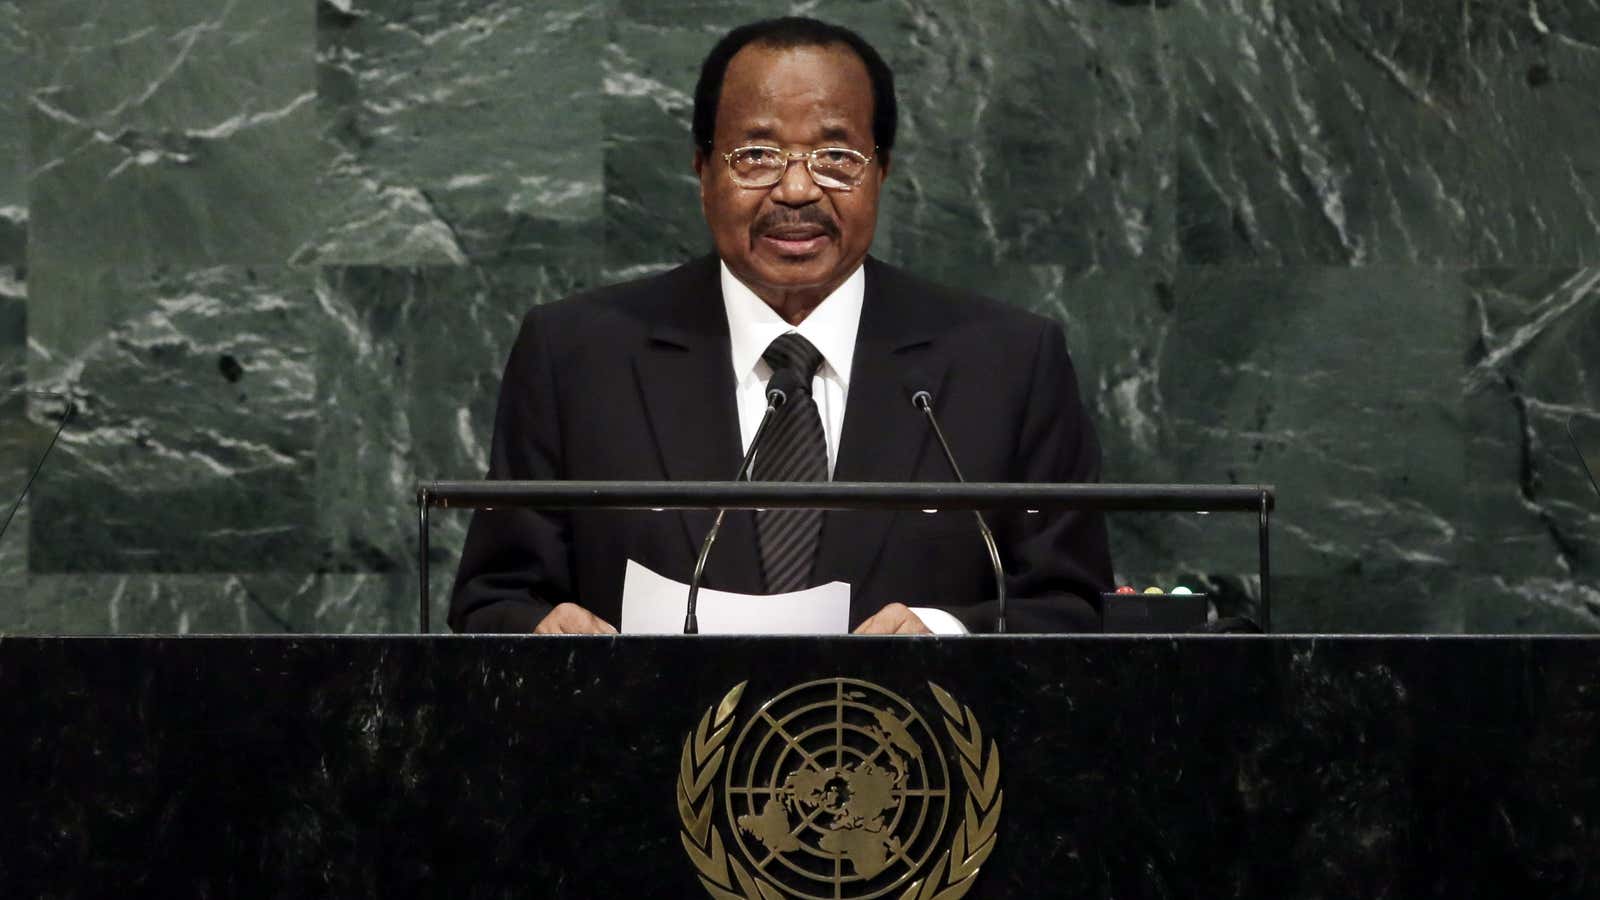 Paul Biya speaks at the UN, on one of his many foreign trips.